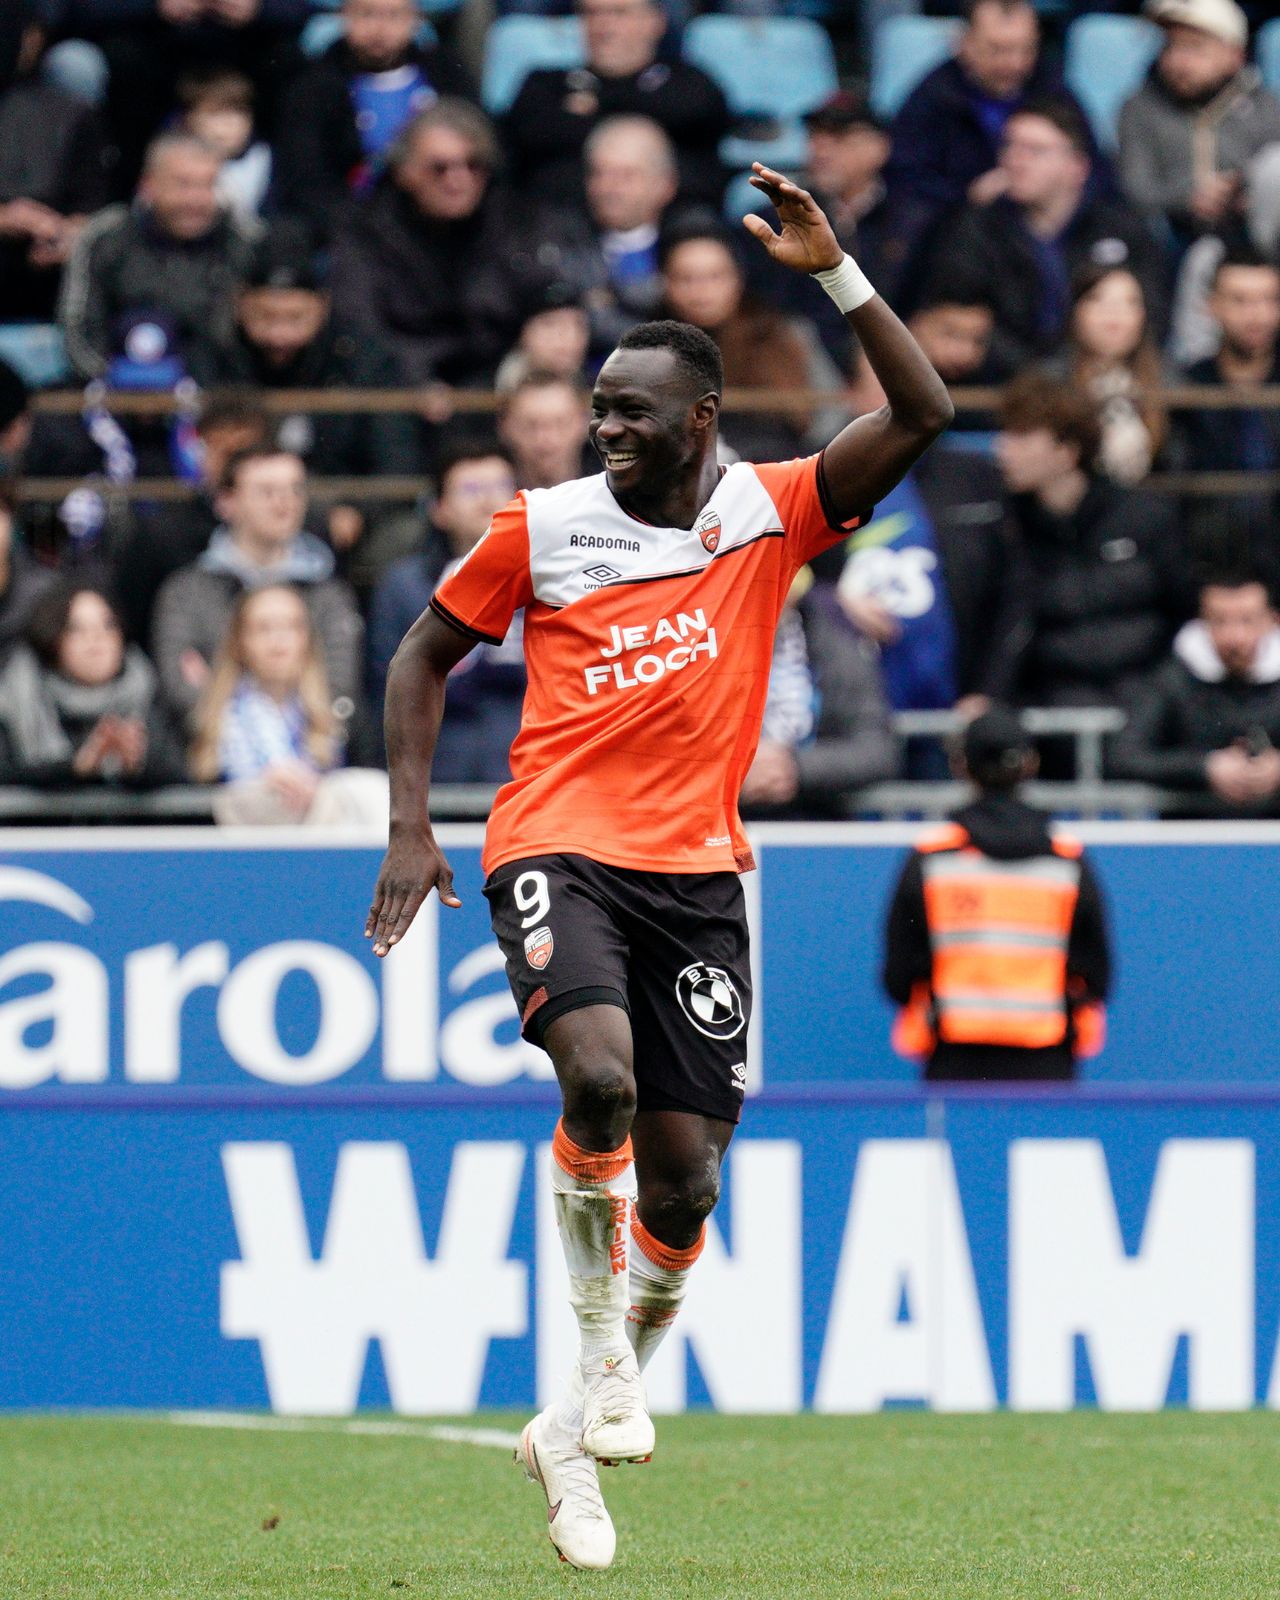 Mohamed Bamba (FC Lorient).